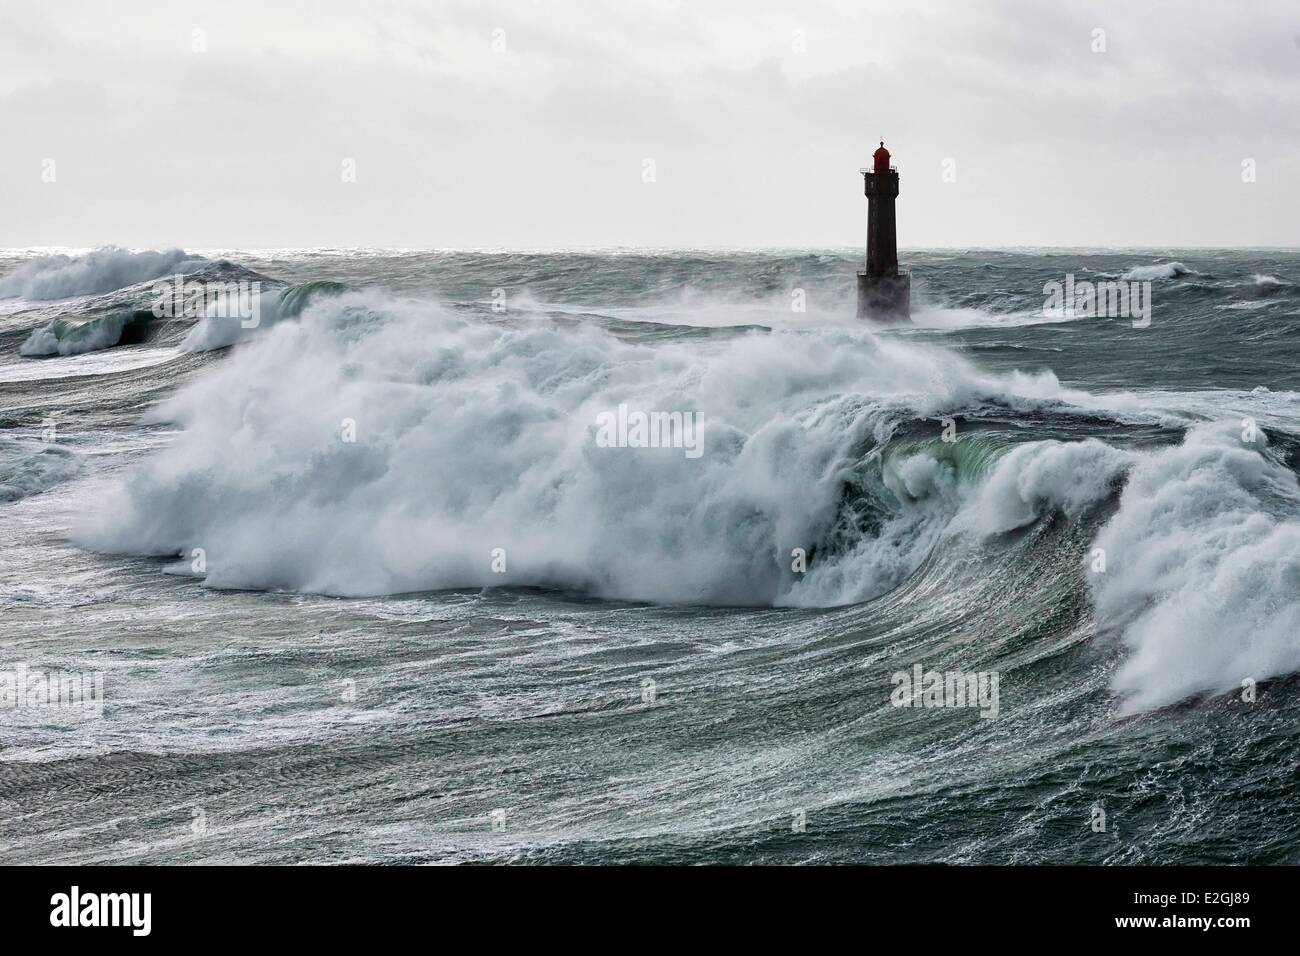 France Finistere Iroise Sea Parc Naturel Regional d'Armorique (Armorica Regional Natural Park) France Finistere Iroise Sea Parc Naturel Regional d'Armorique (Armorica Regional Natural Park) ile d'Ouessant Jument lighthouse during storm Ruth February 8th 2 Stock Photo